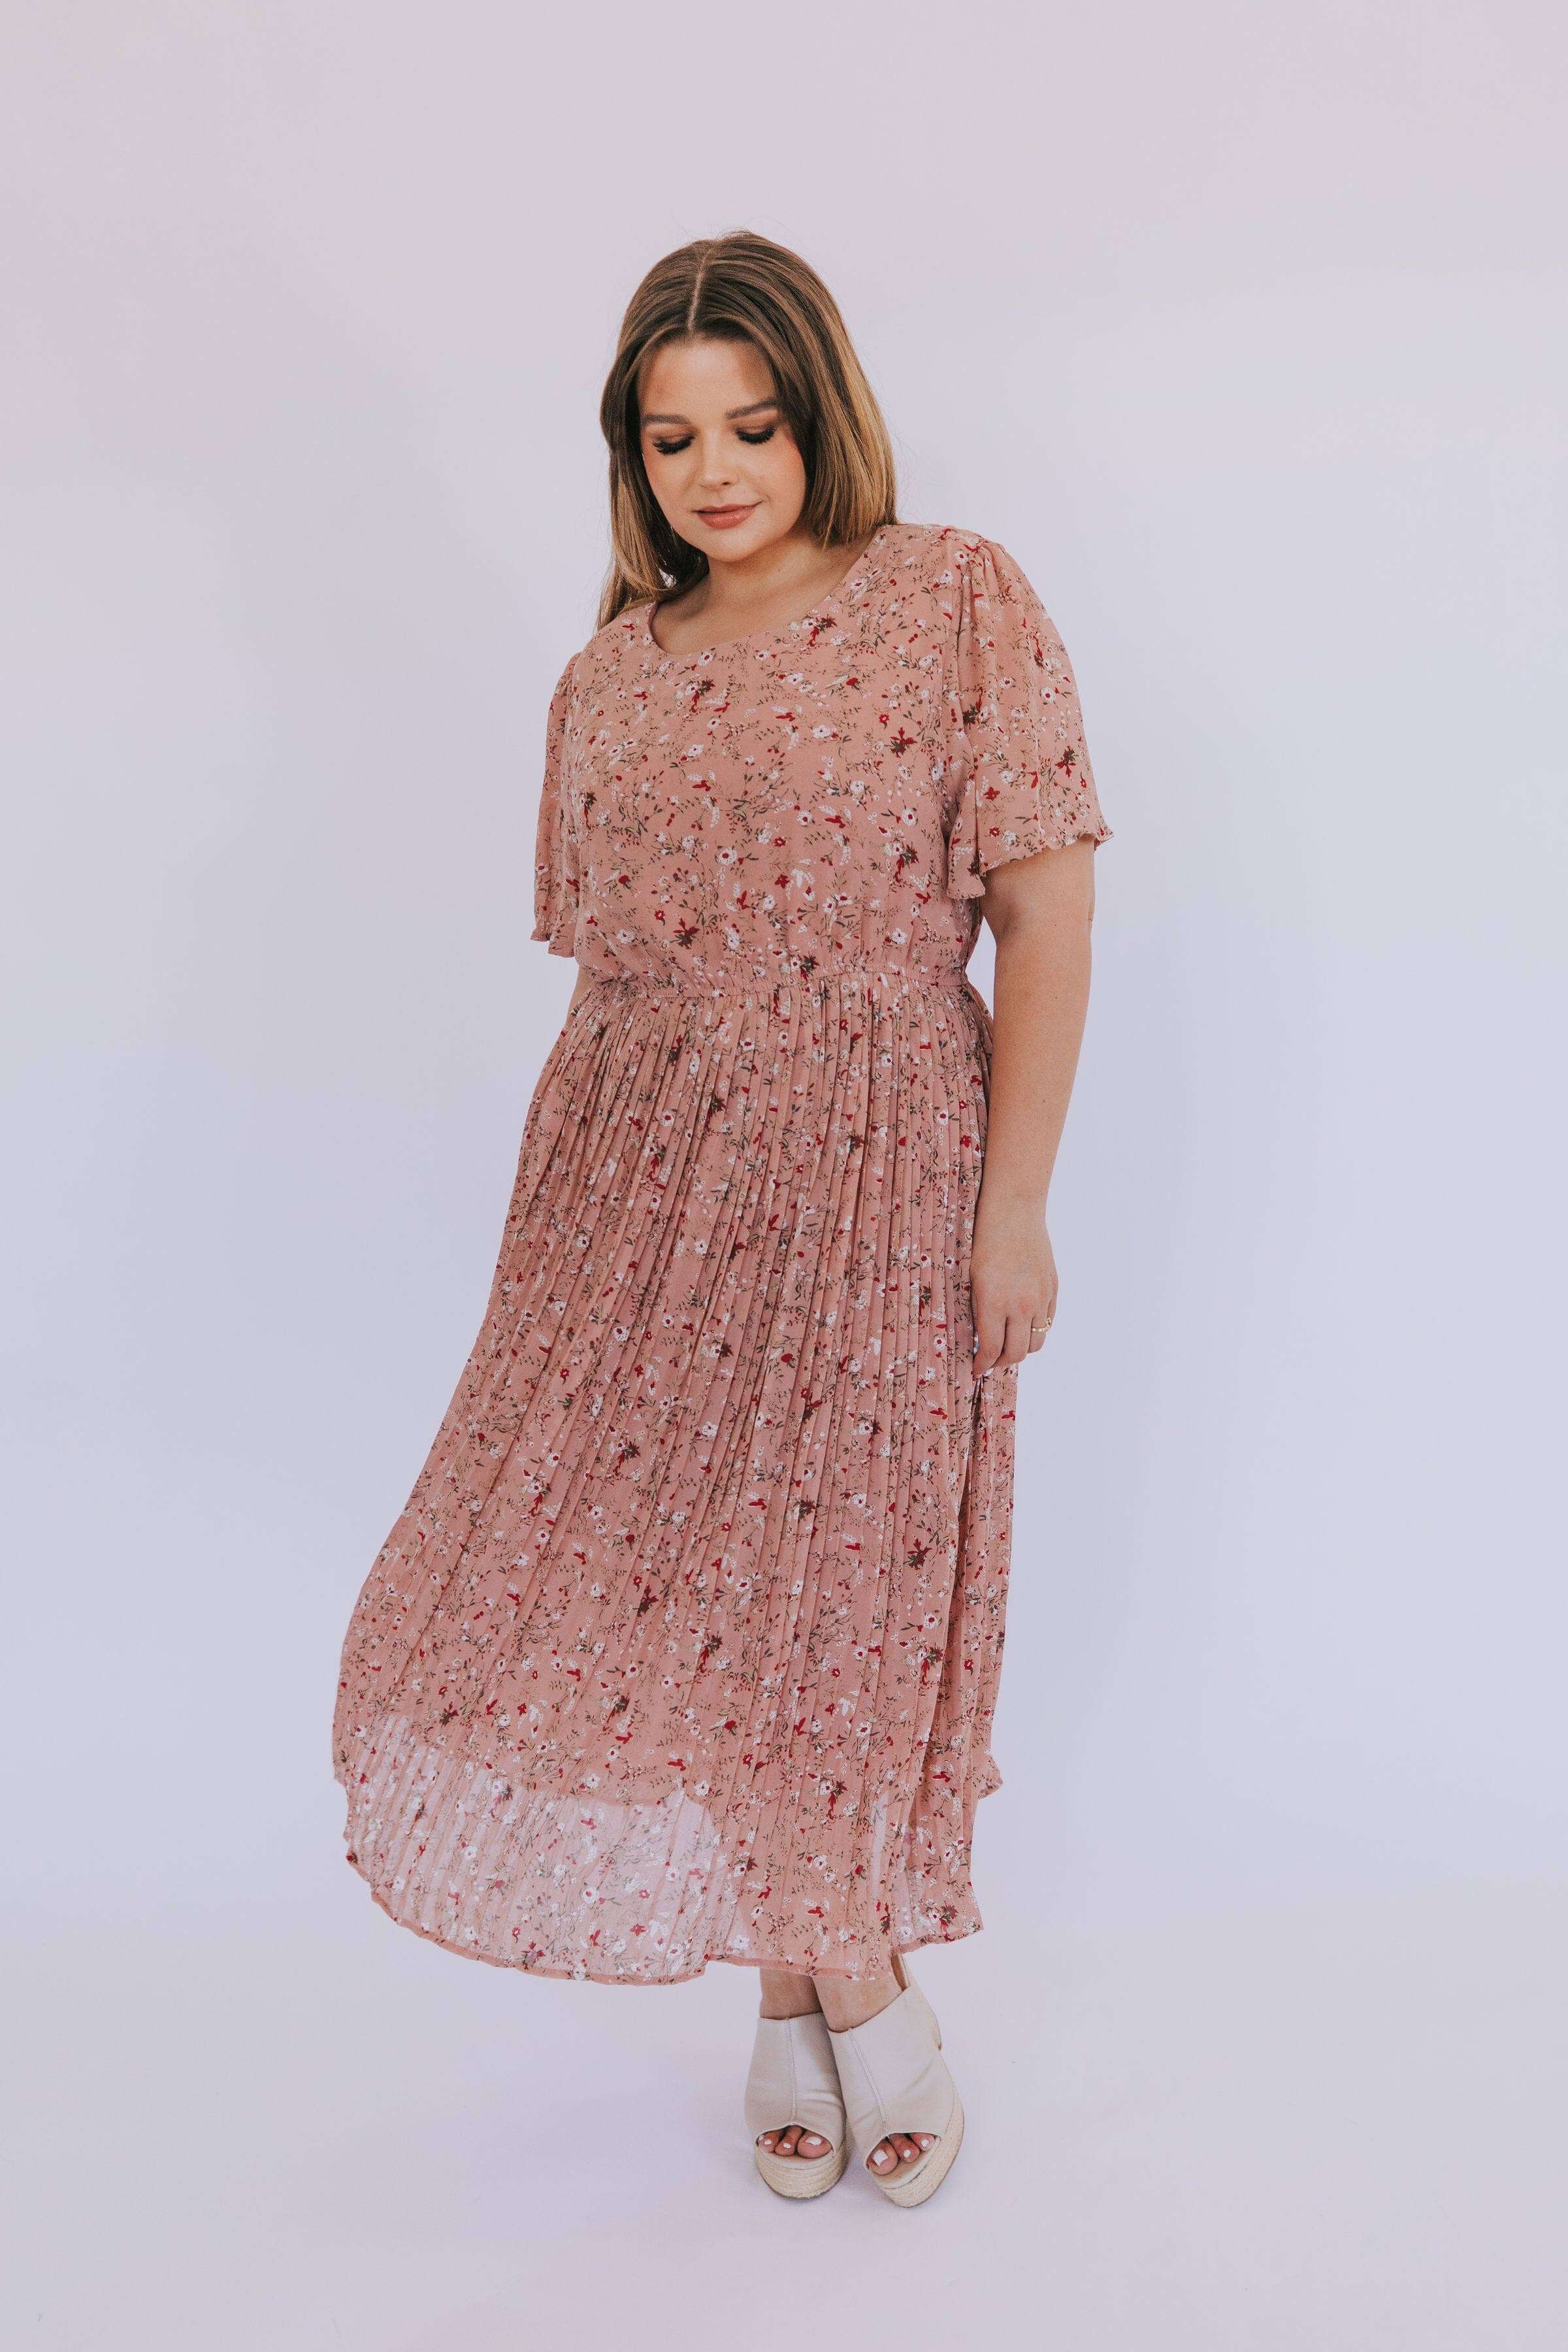 PLUS SIZE - Unapologetically Dress - 2 Colors!